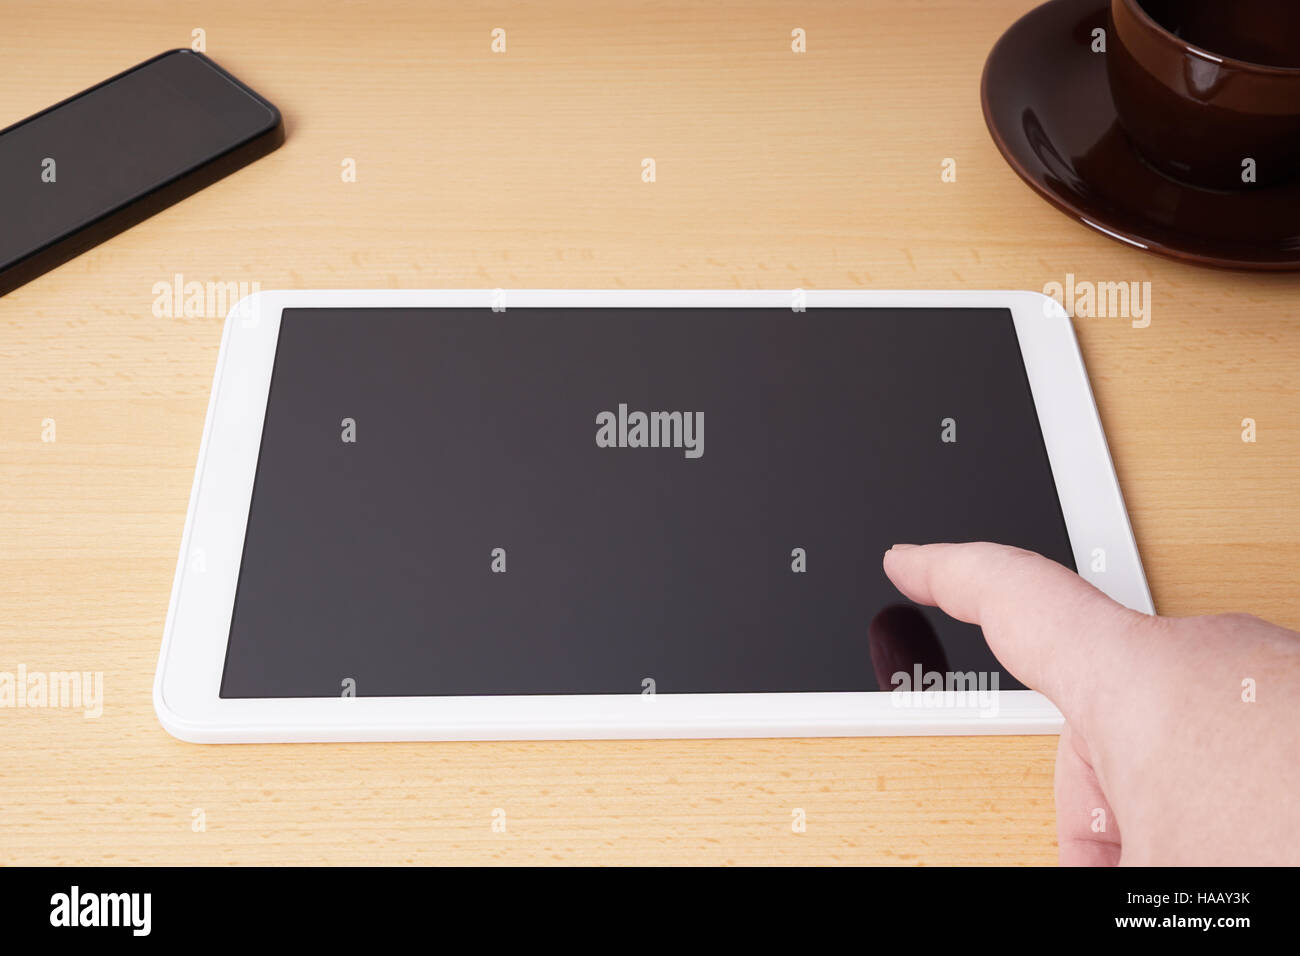 finger touching blank touchscreen on tablet computer Stock Photo